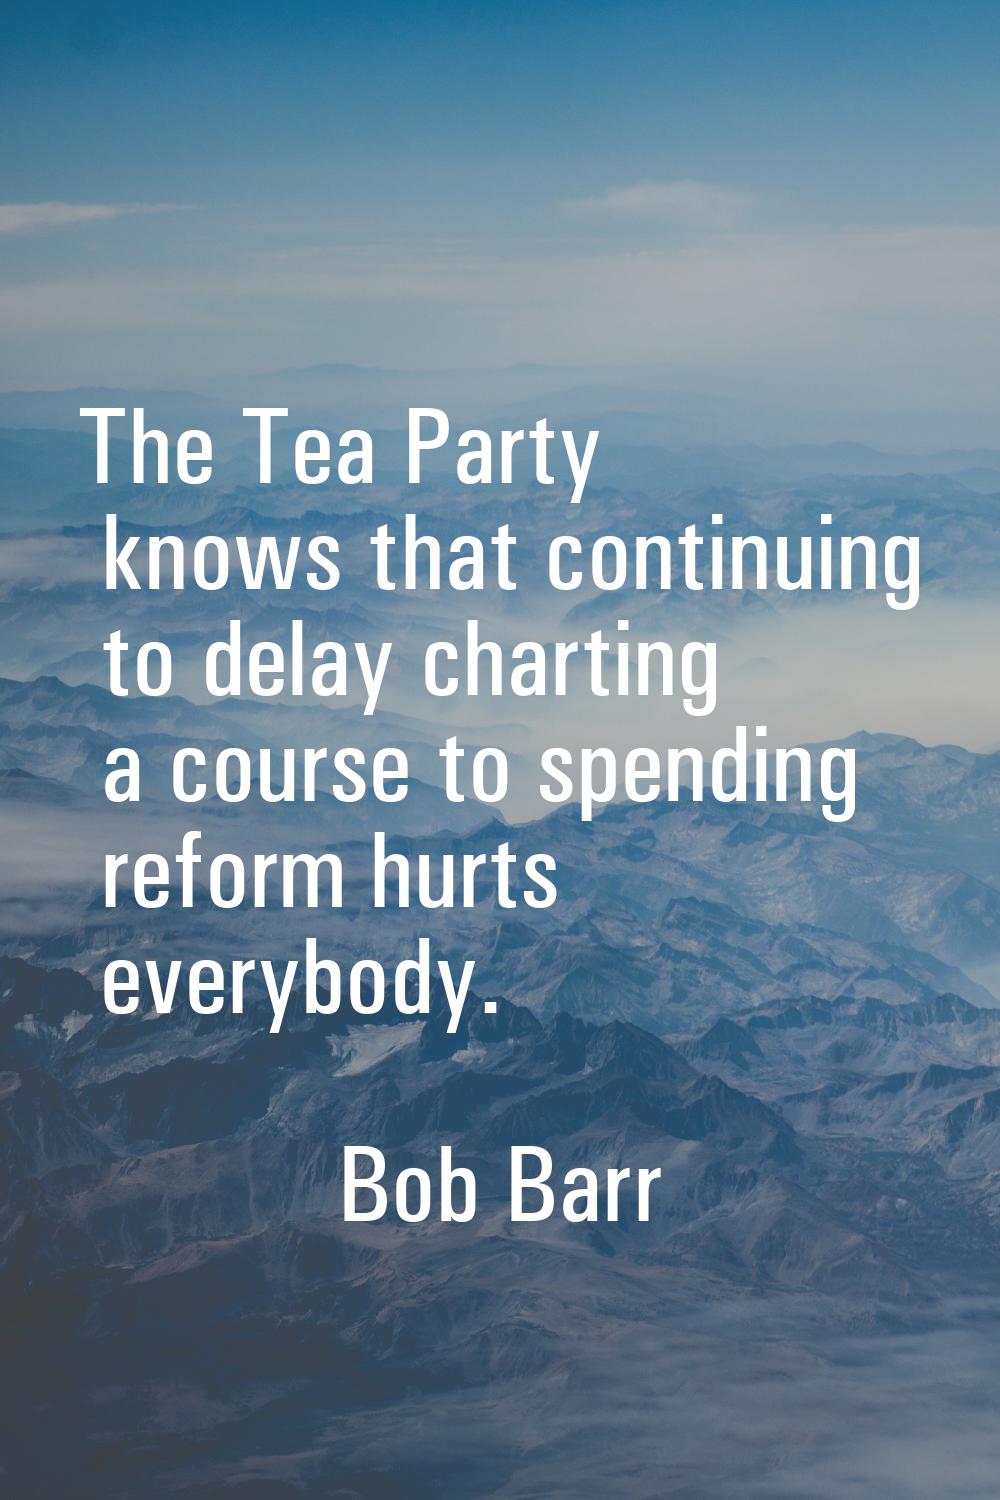 The Tea Party knows that continuing to delay charting a course to spending reform hurts everybody.